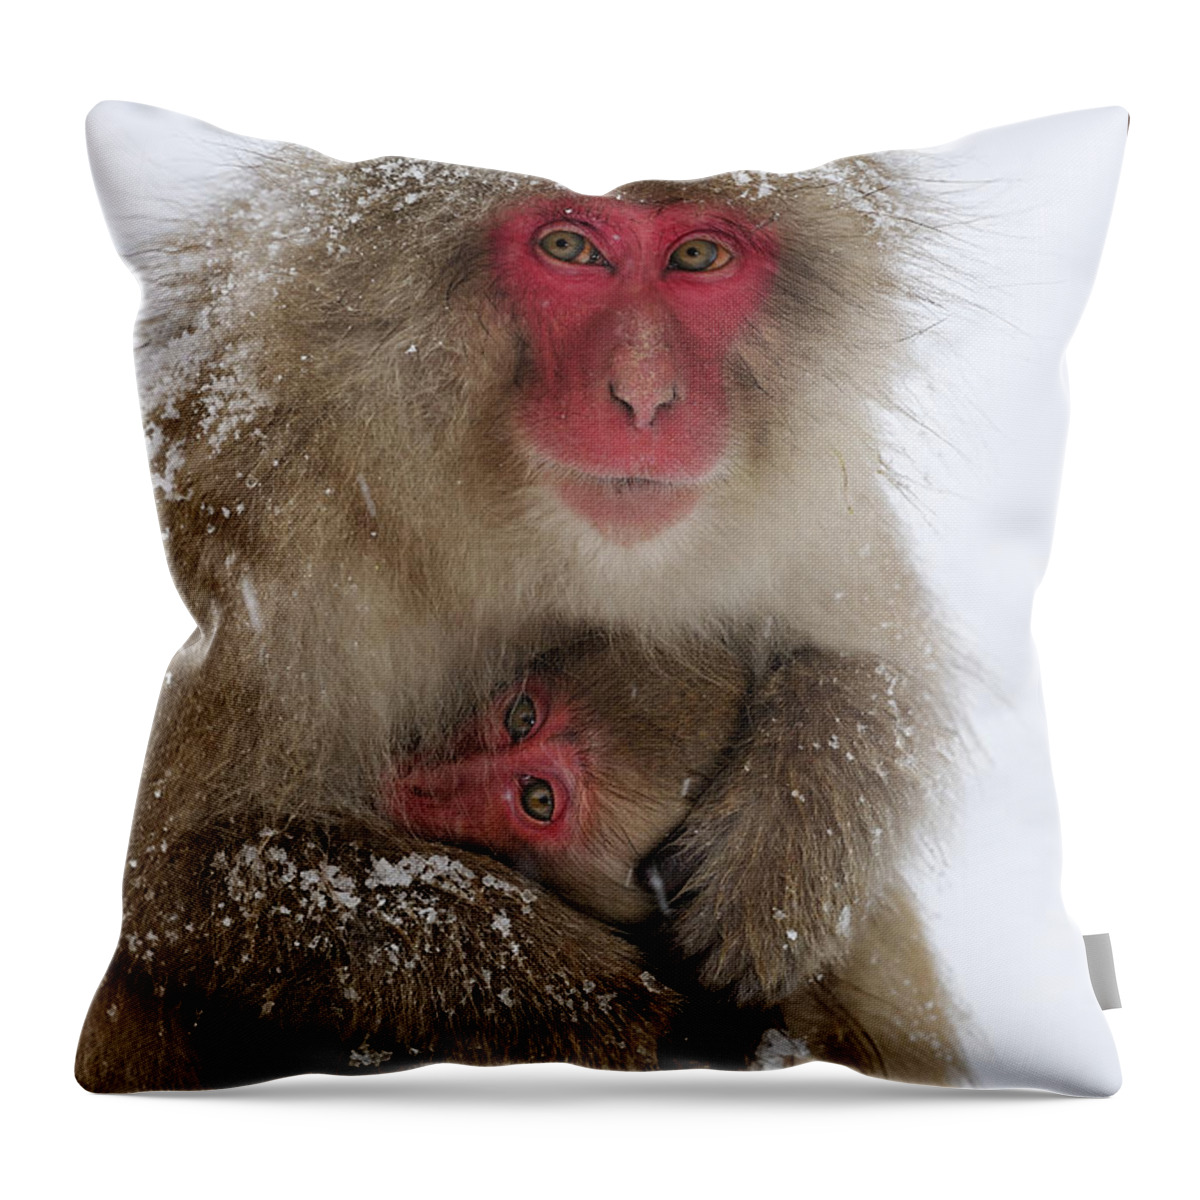 Thomas Marent Throw Pillow featuring the photograph Japanese Macaque Warming Baby by Thomas Marent